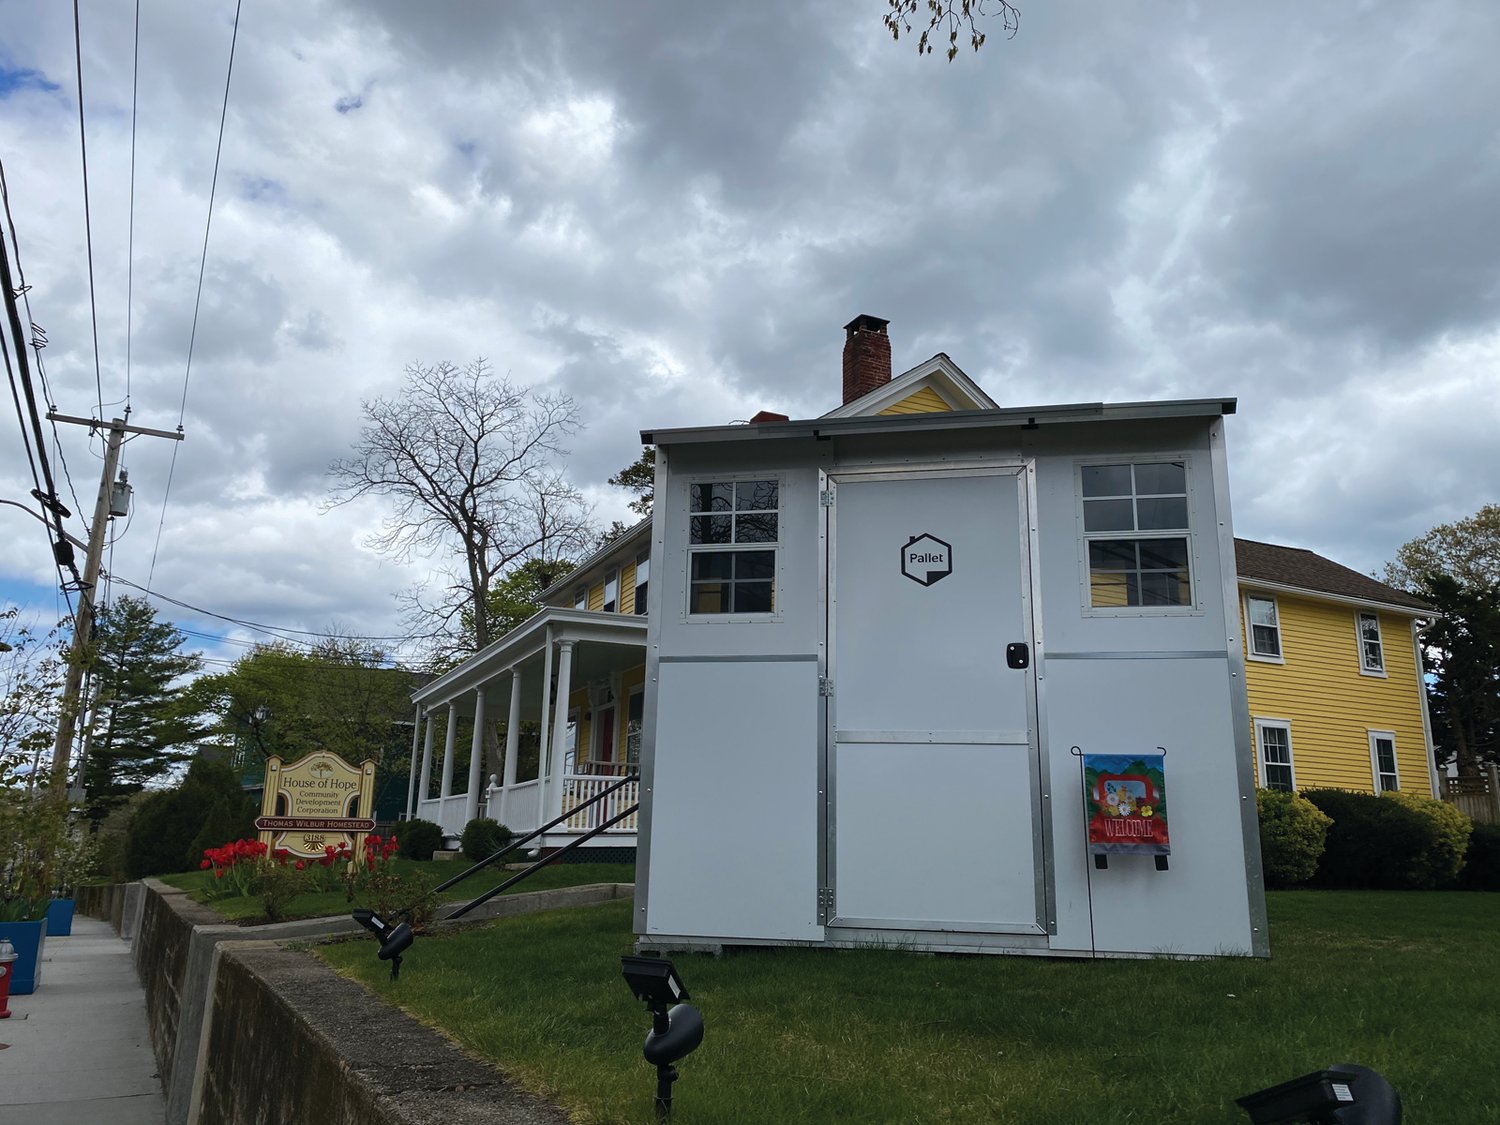 AFFORDABLE HOUSING: A Pallet temporary shelter sits on the front lawn of House of Hope in Warwick. While it may not have all the bells and whistles of the Rohe homes, this tiny home is a step in the right direction for RI’s homeless.